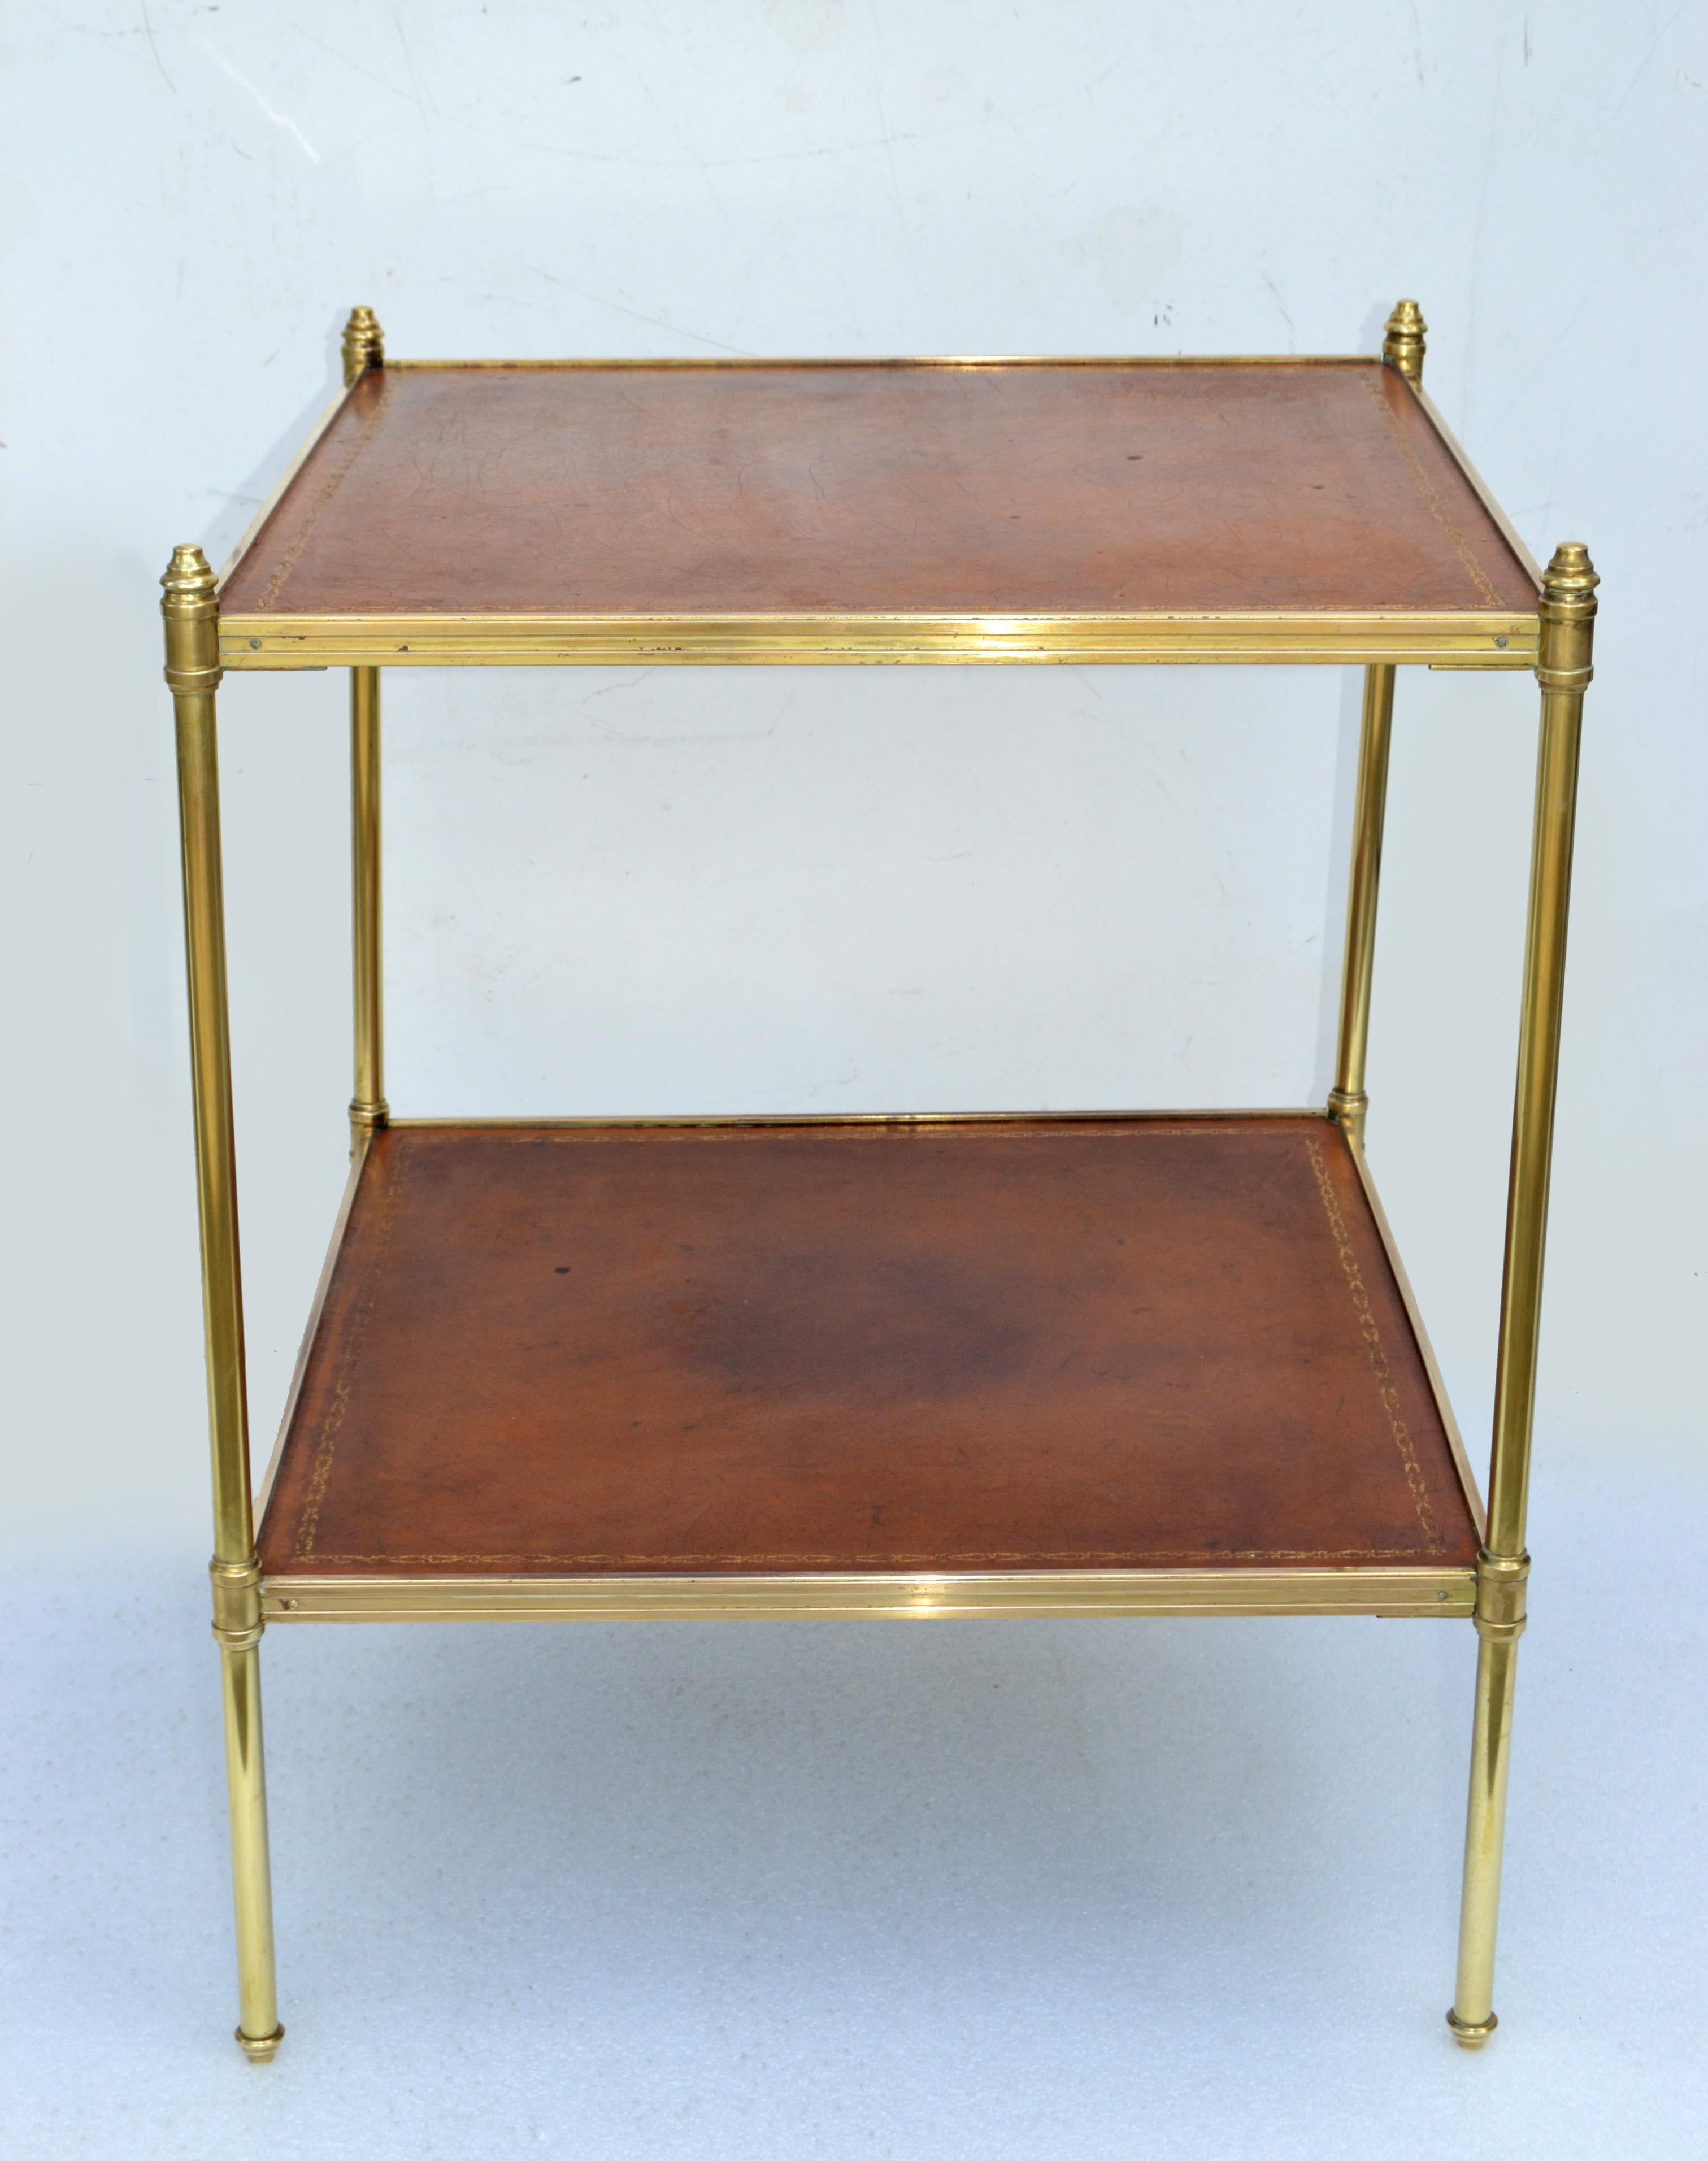 Hand-Crafted Maison Jansen Neoclassical 2 Tier Square Leather Top Side End Table France